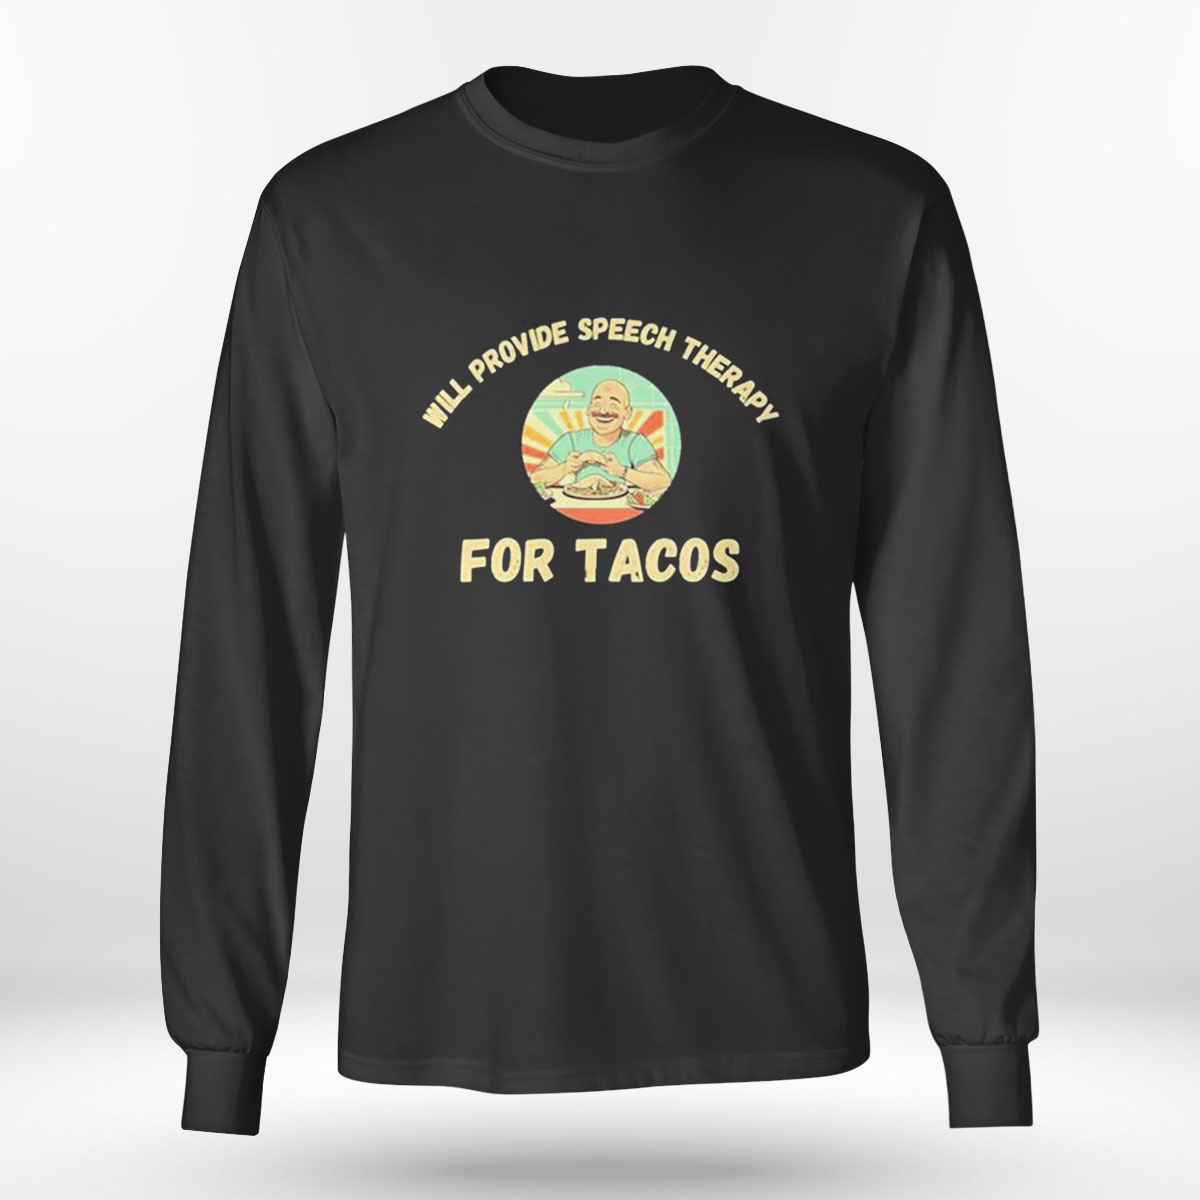 Will Provide Speech Therapy Tacos Lovers Funny Sayings Shirt, Ladies Tee